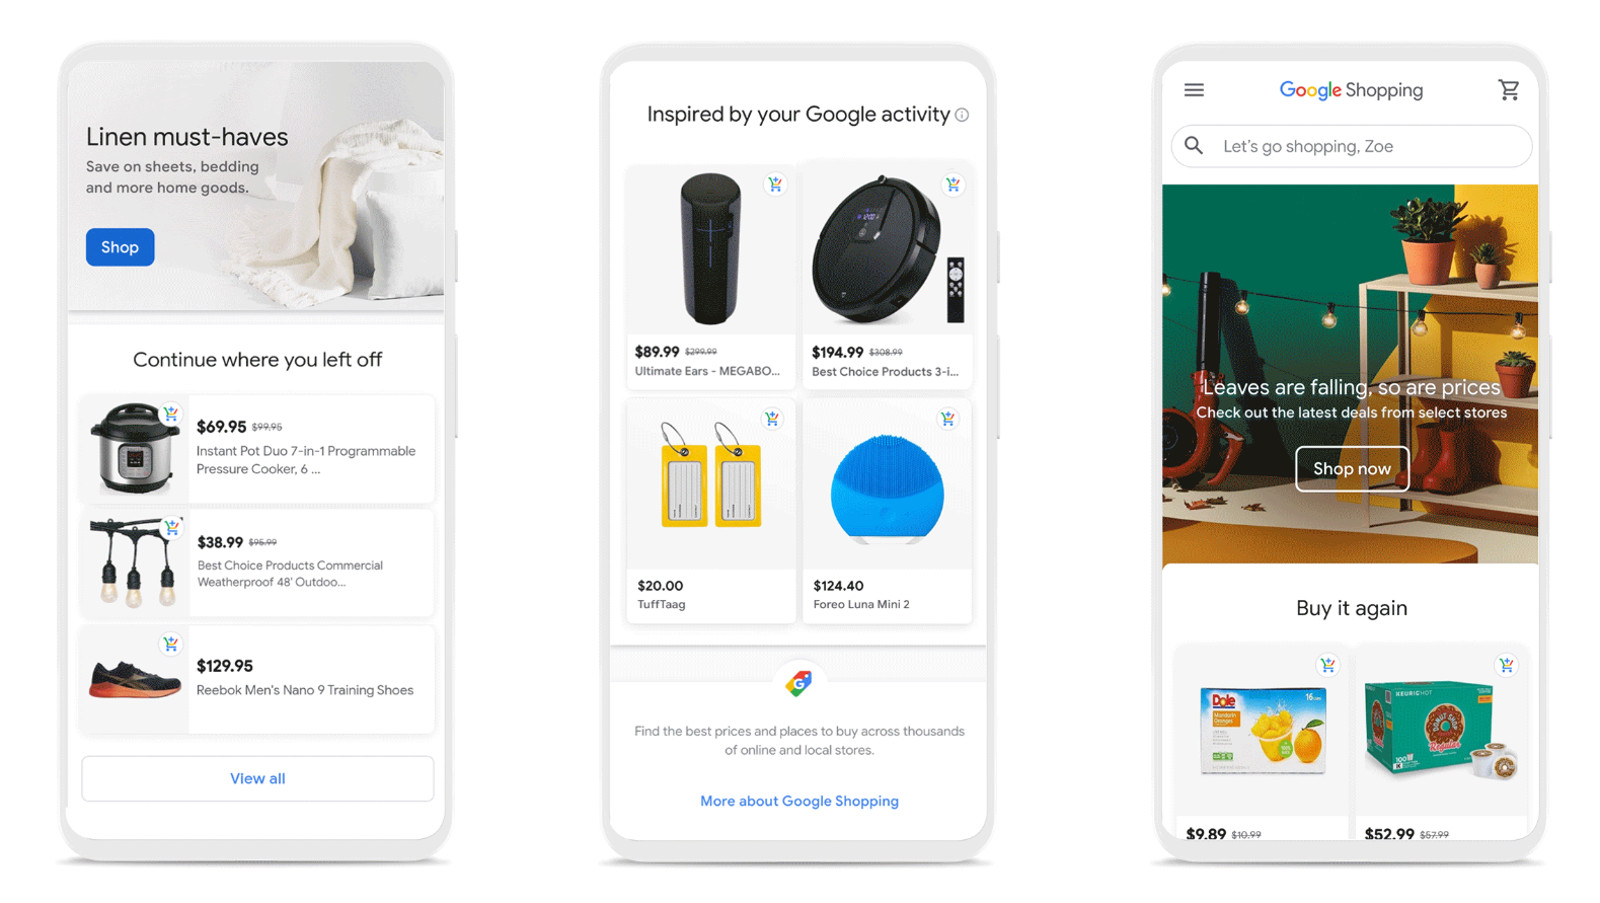 The new Google Shopping experience.